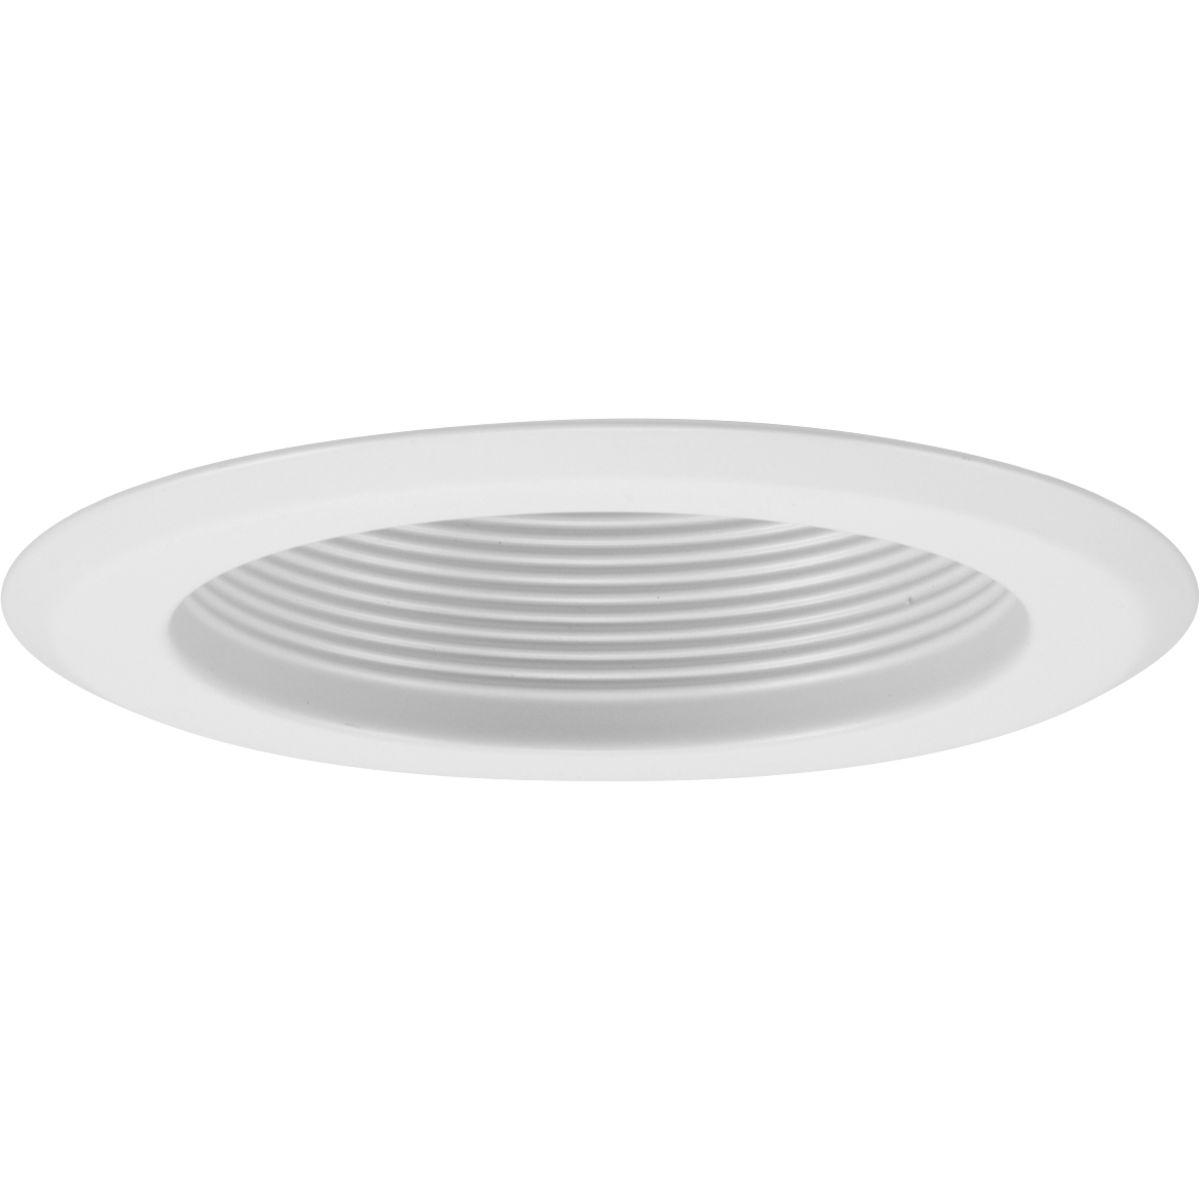 Hubbell P868-28 5 inch recessed is ideal for new construction residential applications. It can also be used in most light commercial applications. The white step baffle trim use a friction springs to attach to the housing (P851-ICAT) to provide a flush fit against the ce